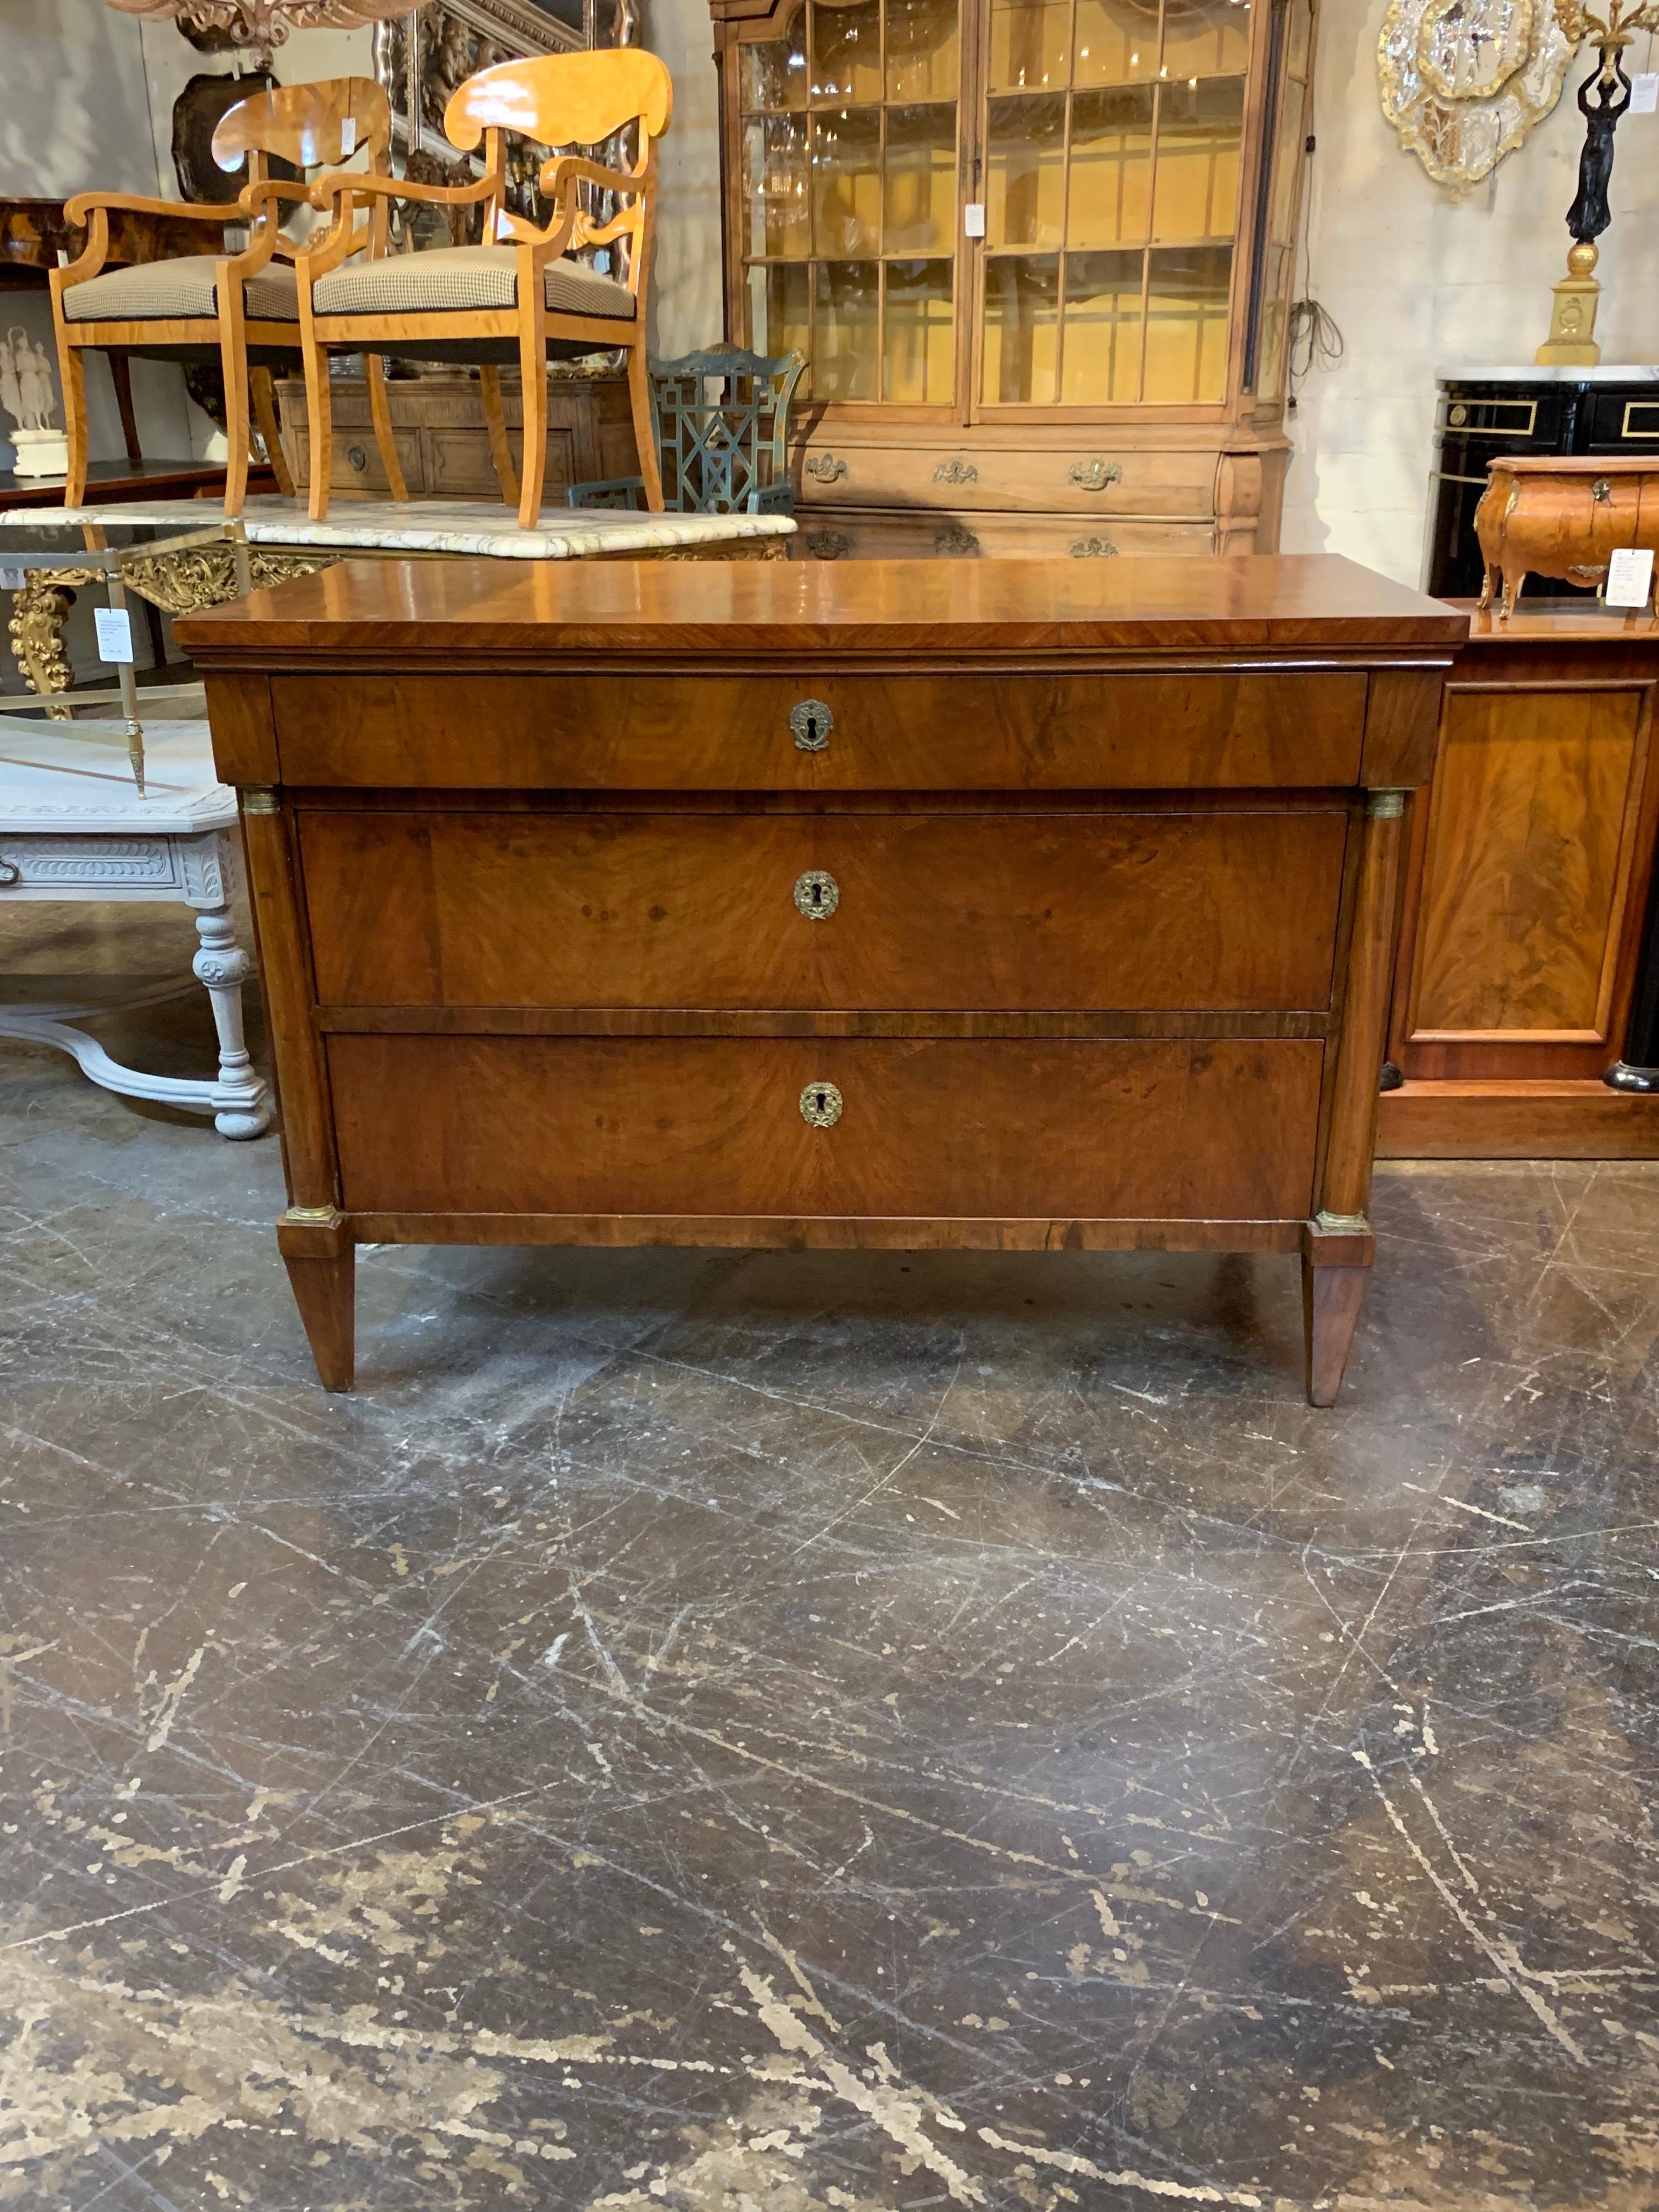 Handsome 19th century French Empire neoclassical chest of drawers with brass trim. Absolutely gorgeous finish on this piece! A classic style that would blend well with multiple types of decor. Stunning!